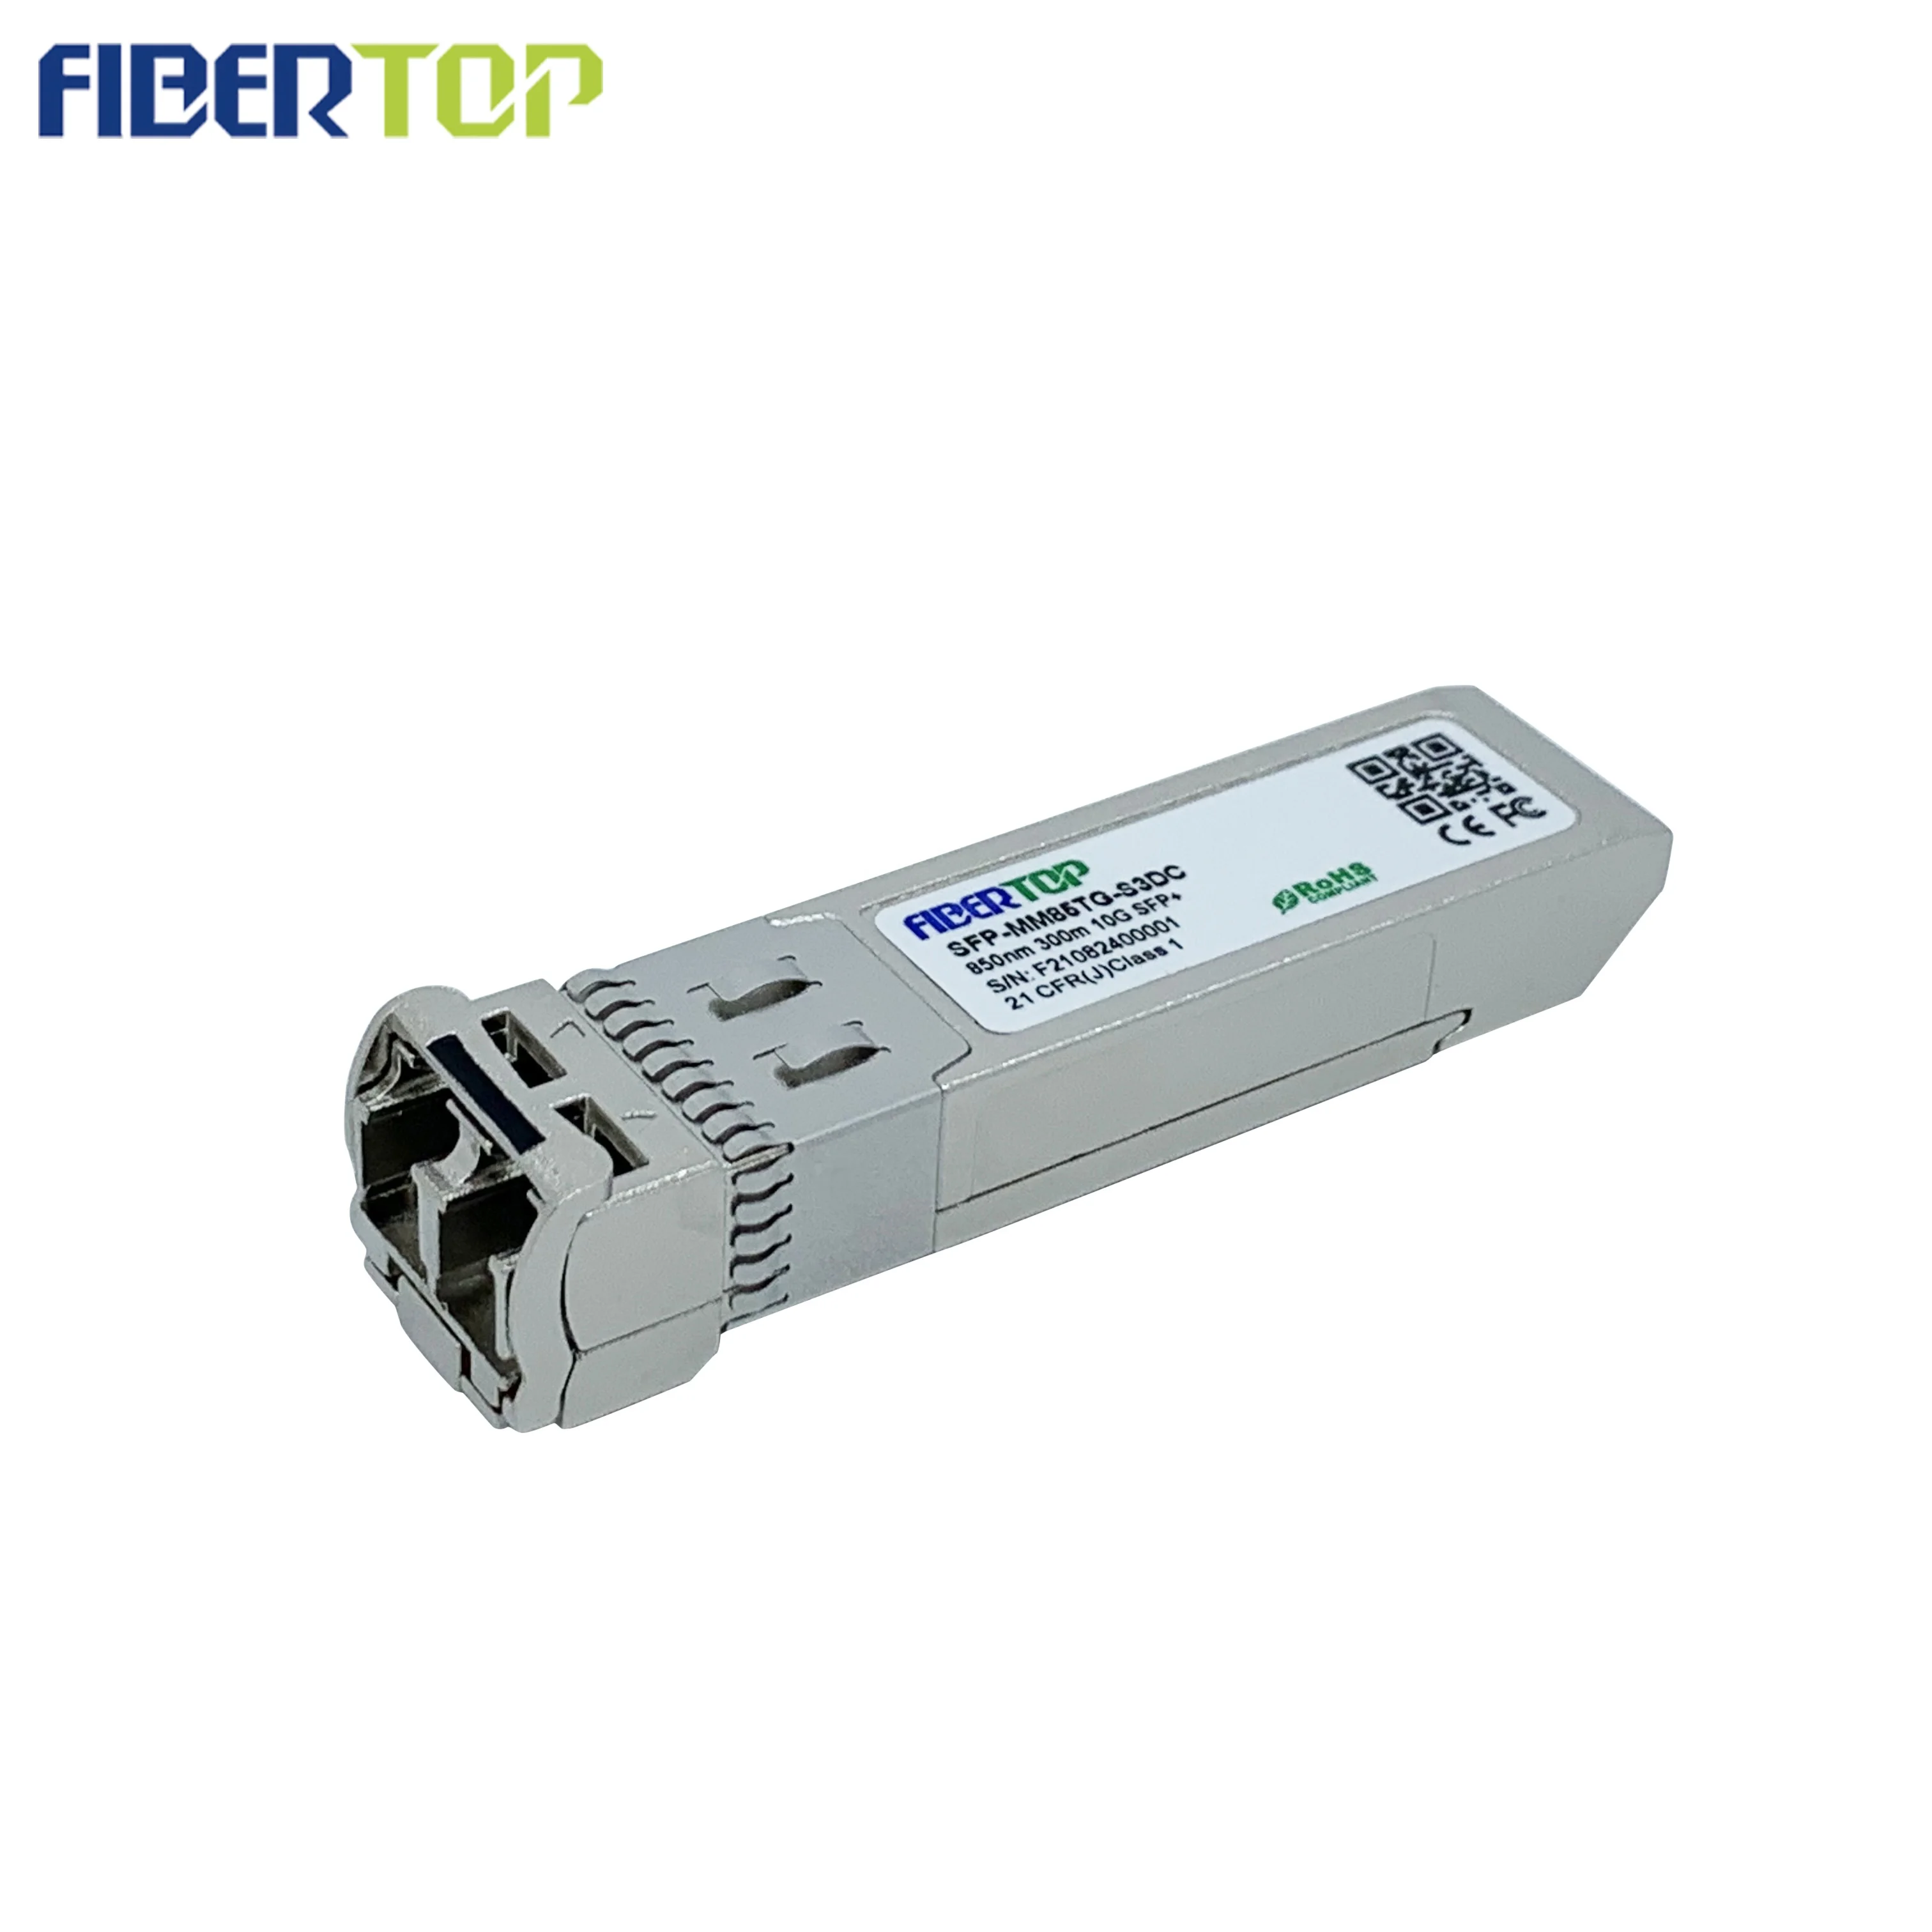 compatible with J9150A transceiver FIBERTOP 10G SFP+ 850NM reach to 300M dual lc connectors built-in TX and RX CDR